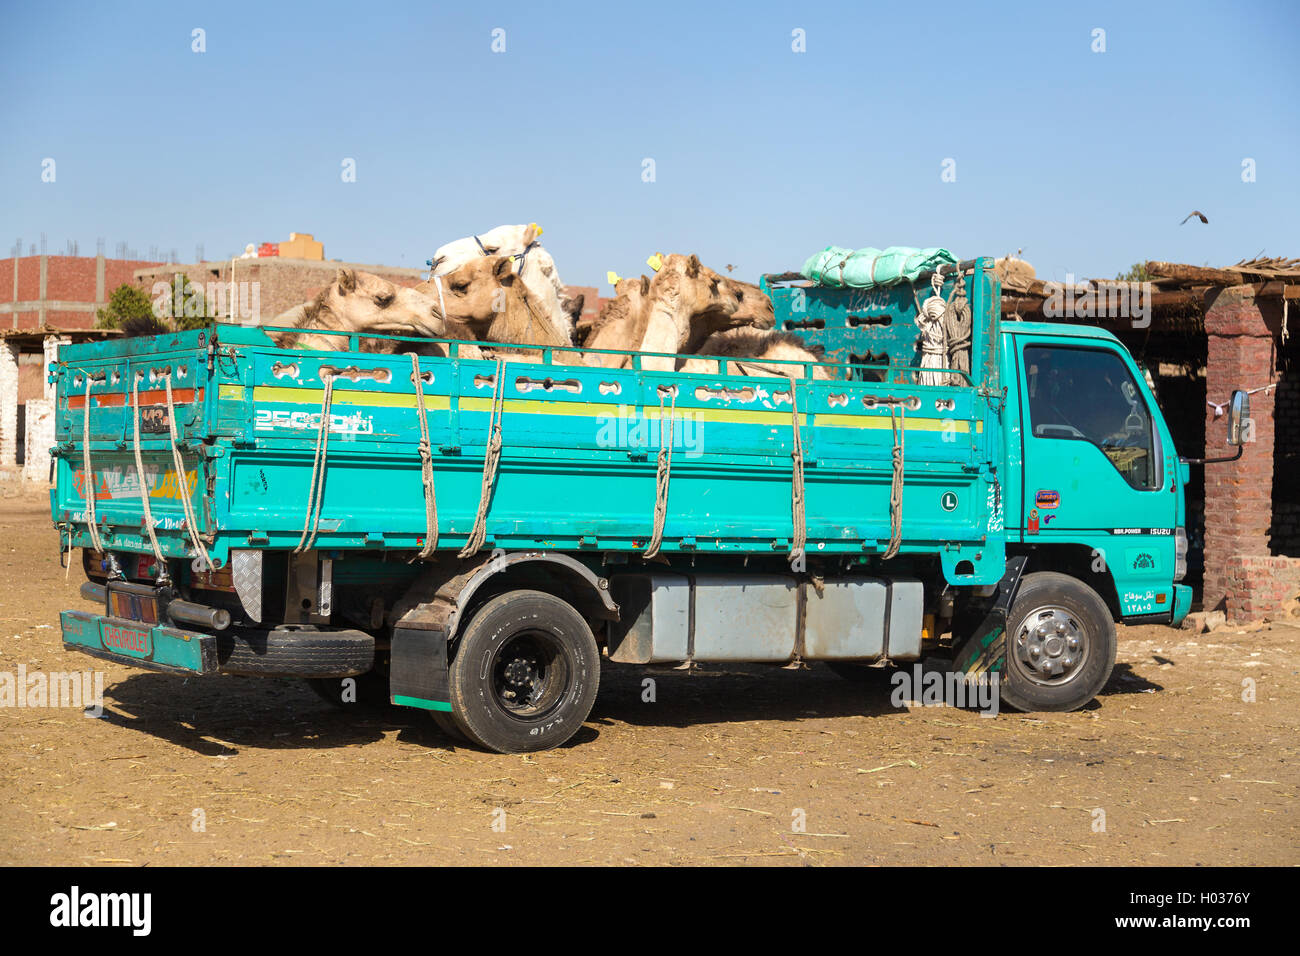 DARAW, EGYPT - FEBRUARY 6, 2016: Camels loaded on the back of the truck at Camel market. Stock Photo